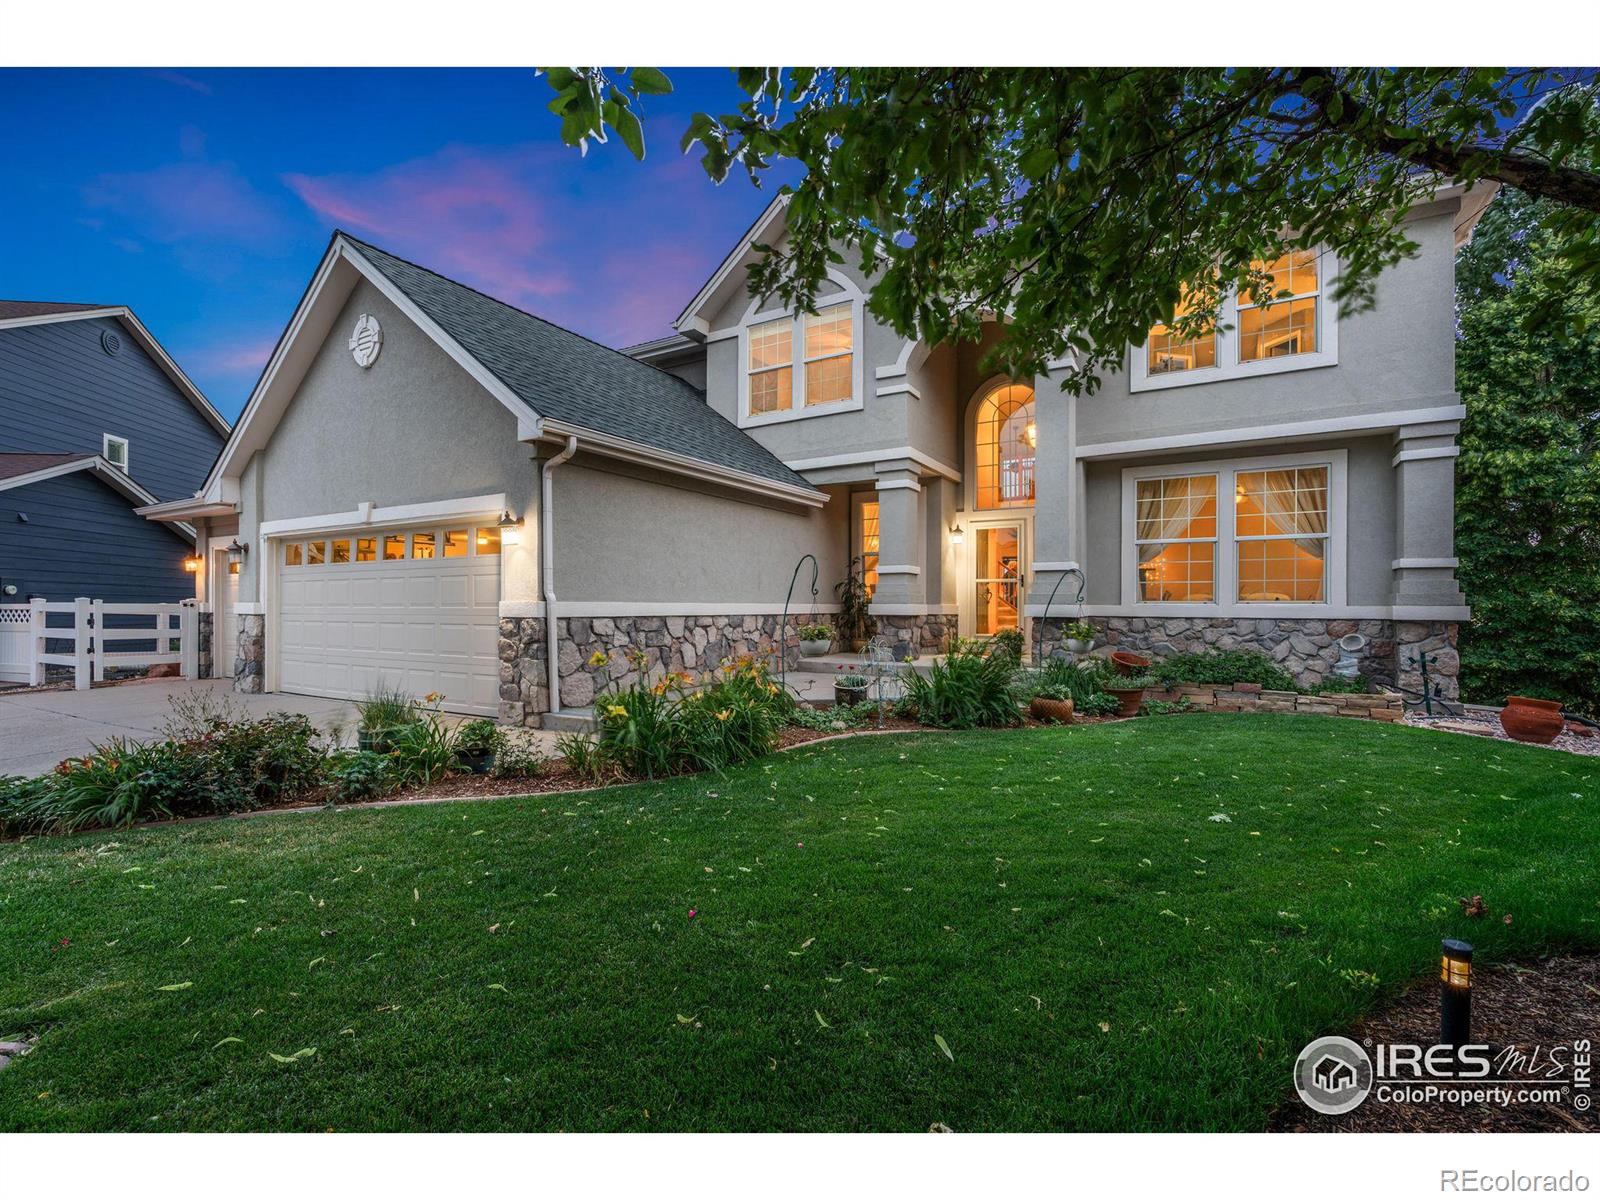 7233  Trout Court, fort collins MLS: 4567891014763 Beds: 4 Baths: 3 Price: $799,920